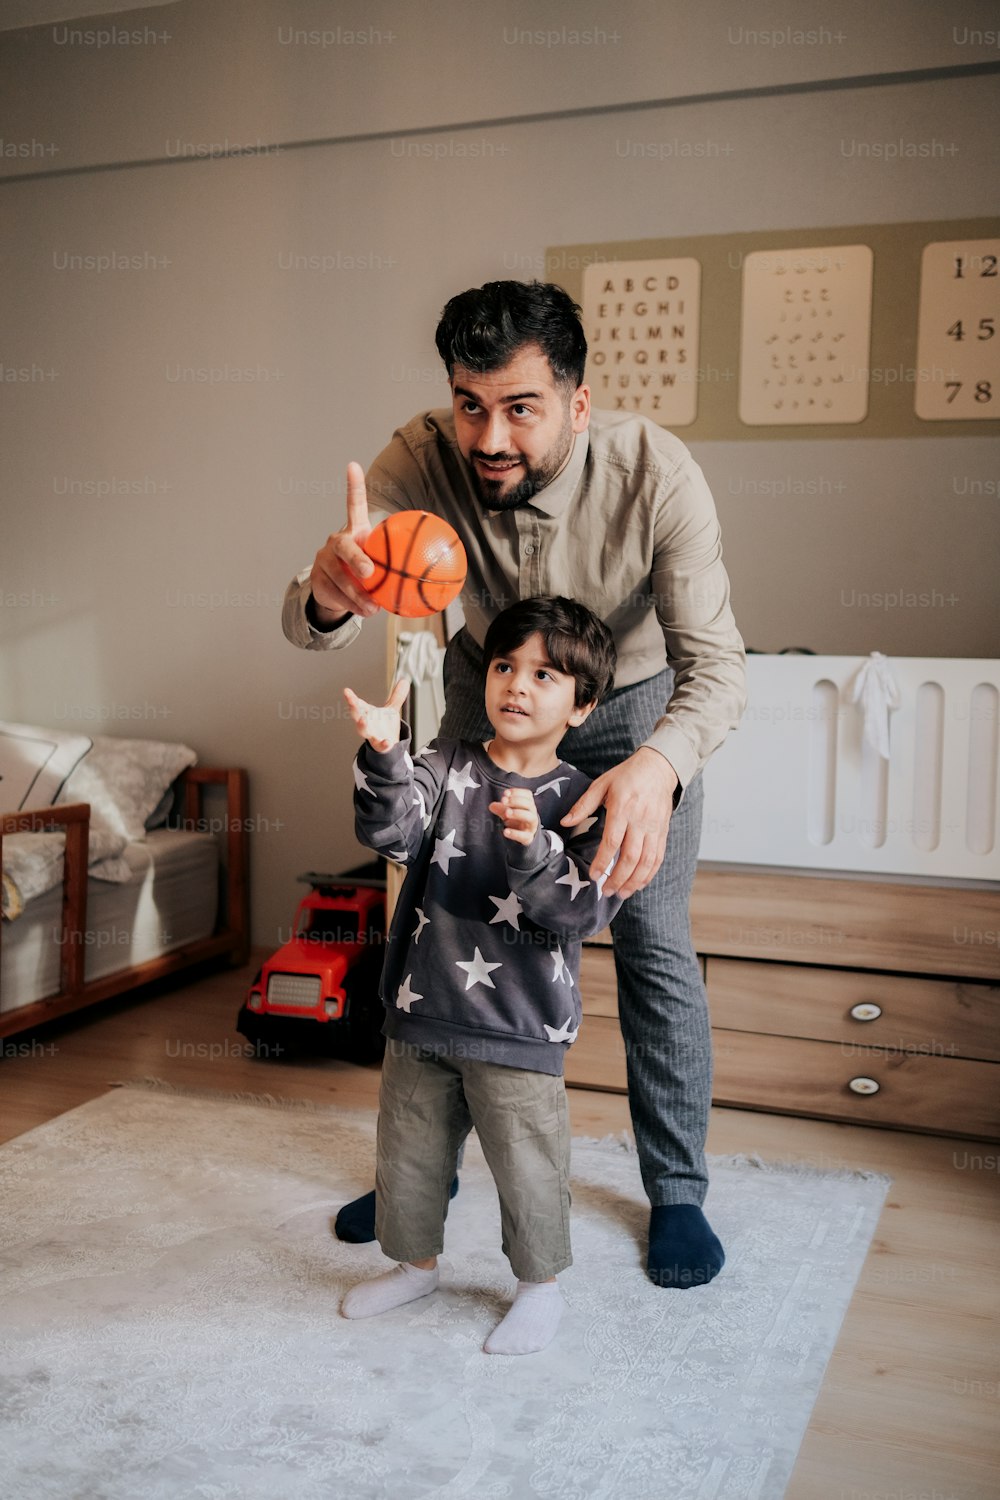 a man holding a basketball while standing next to a little boy